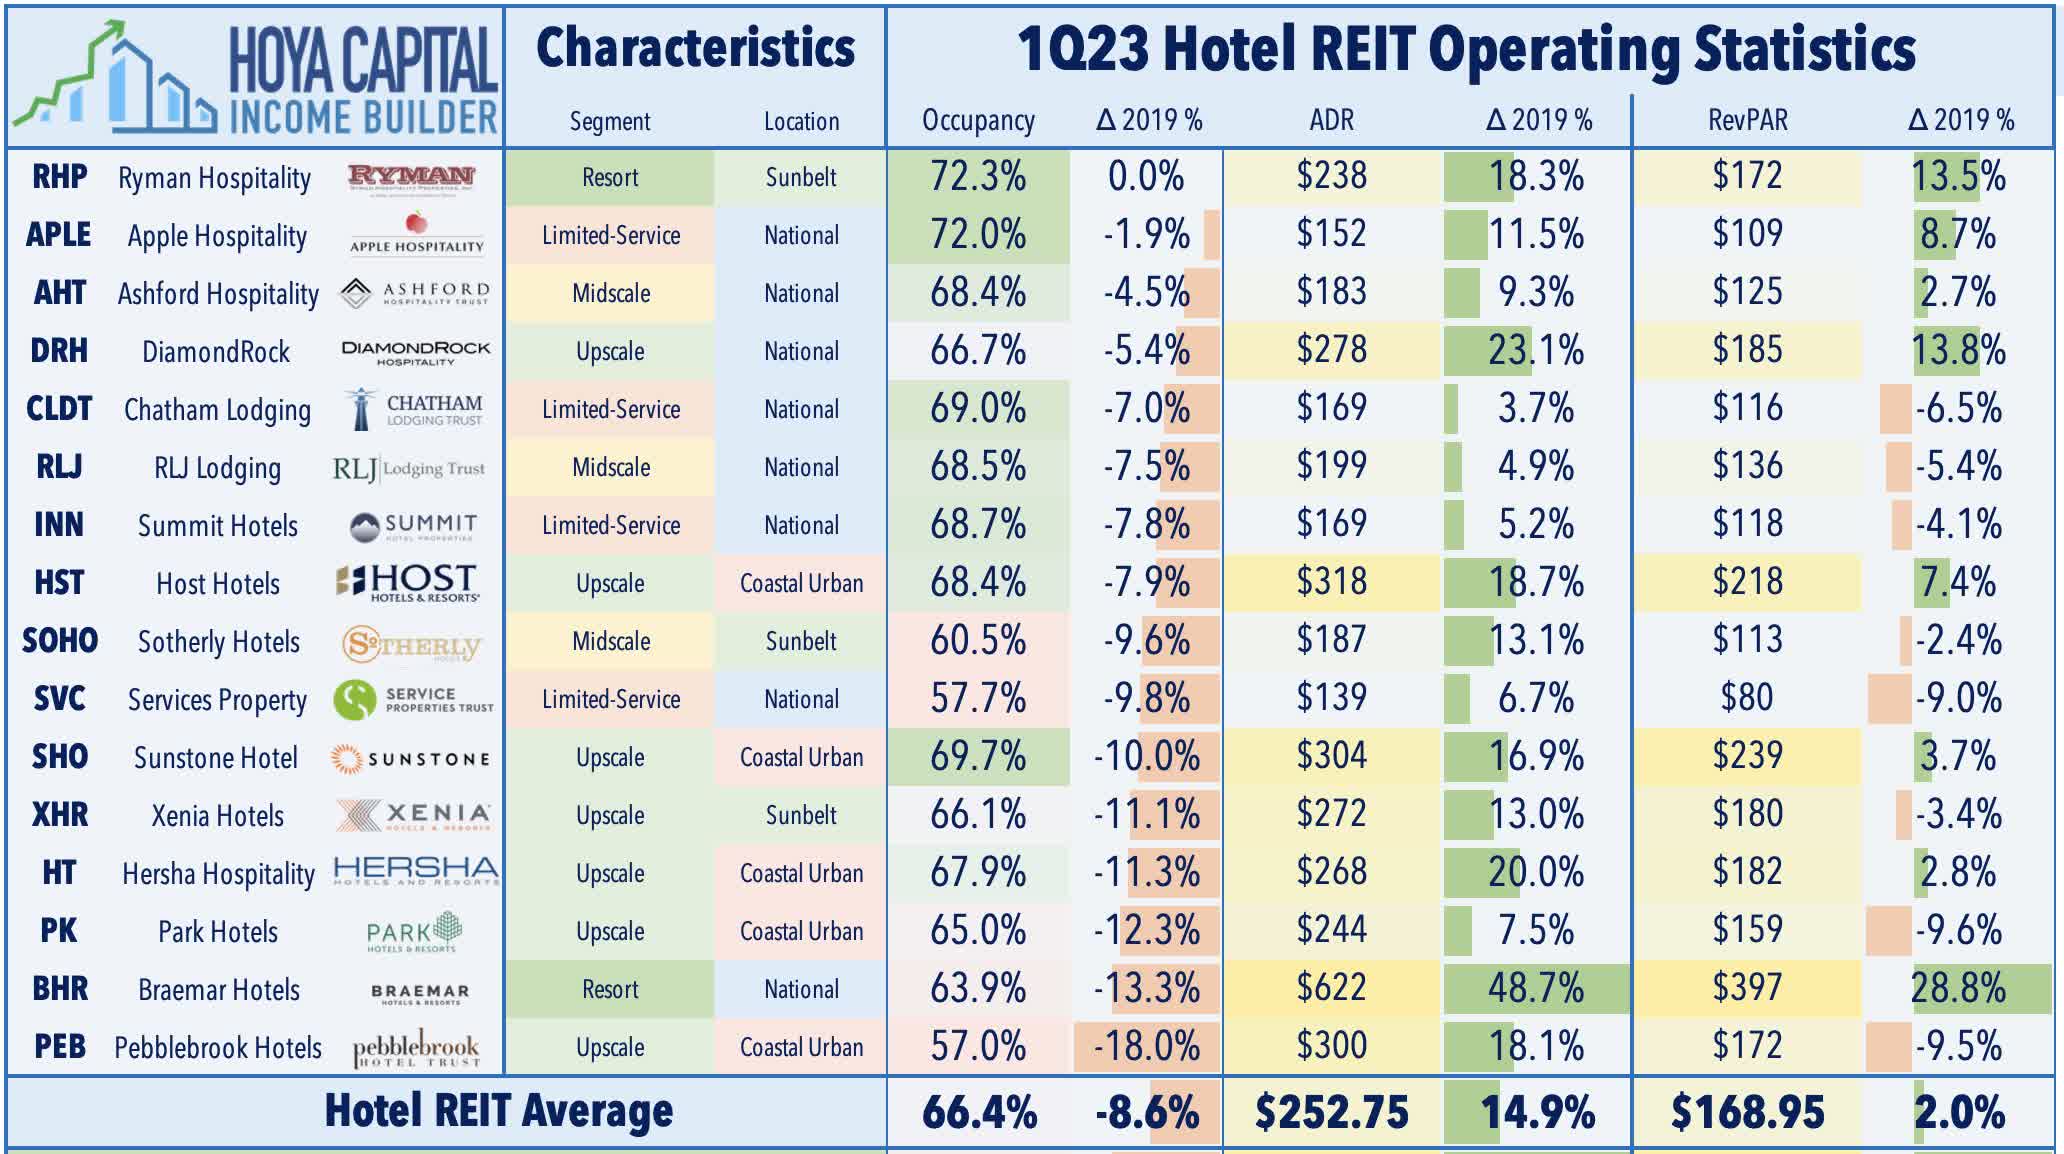 list of Hotel REITs, showing data as described in text